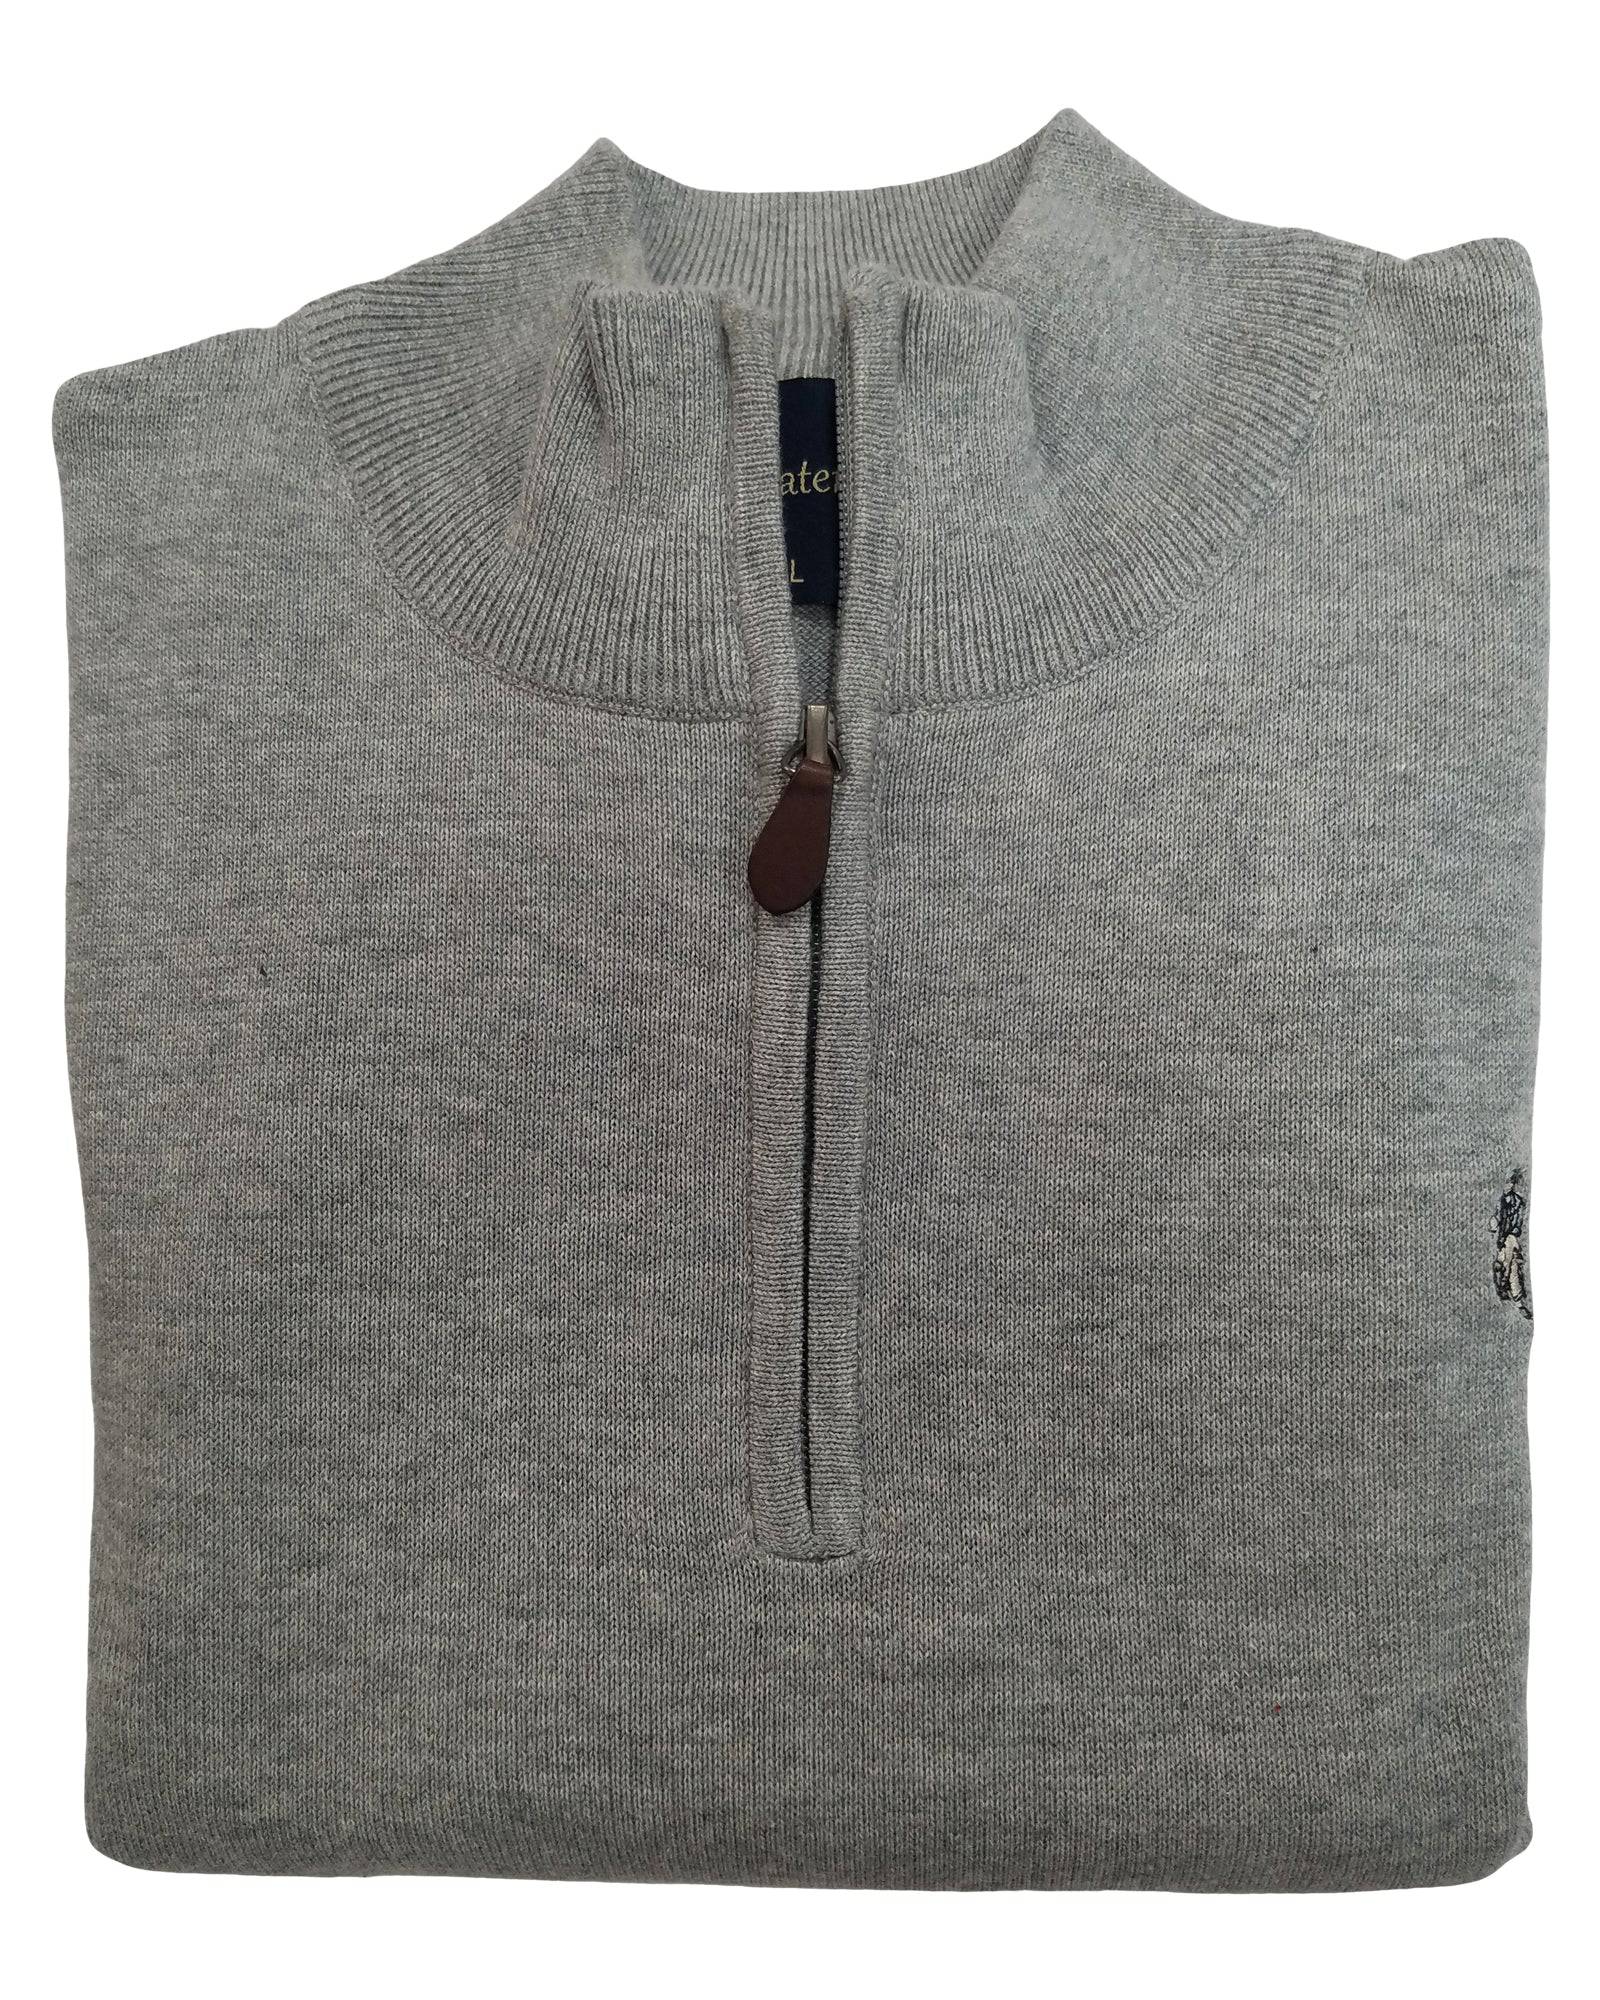 1/4 Zip Mock Sweater in Silver Heather Cotton Blend - Rainwater's Men's Clothing and Tuxedo Rental